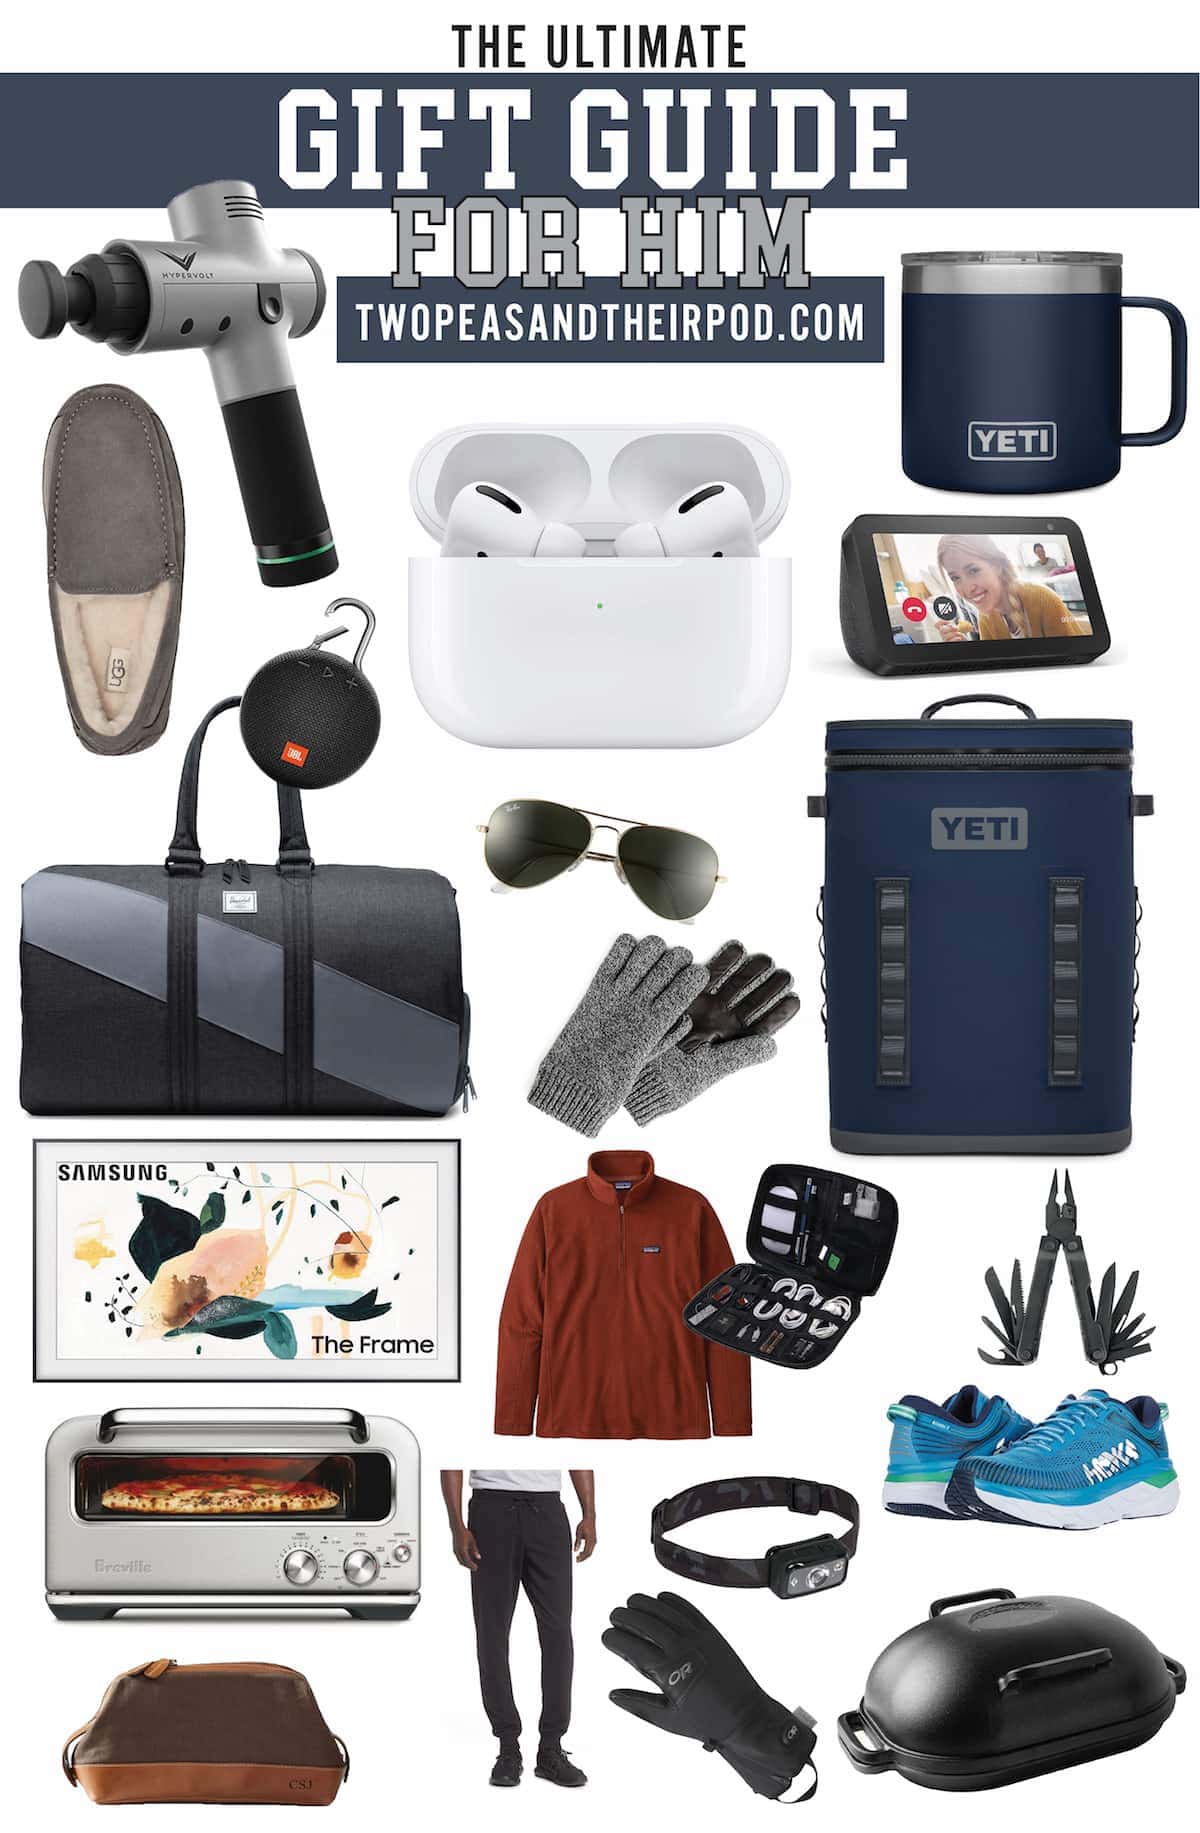 The Best List Of Fitness Gift Ideas  Fitness gifts, Ultimate gift guide,  Gift guide